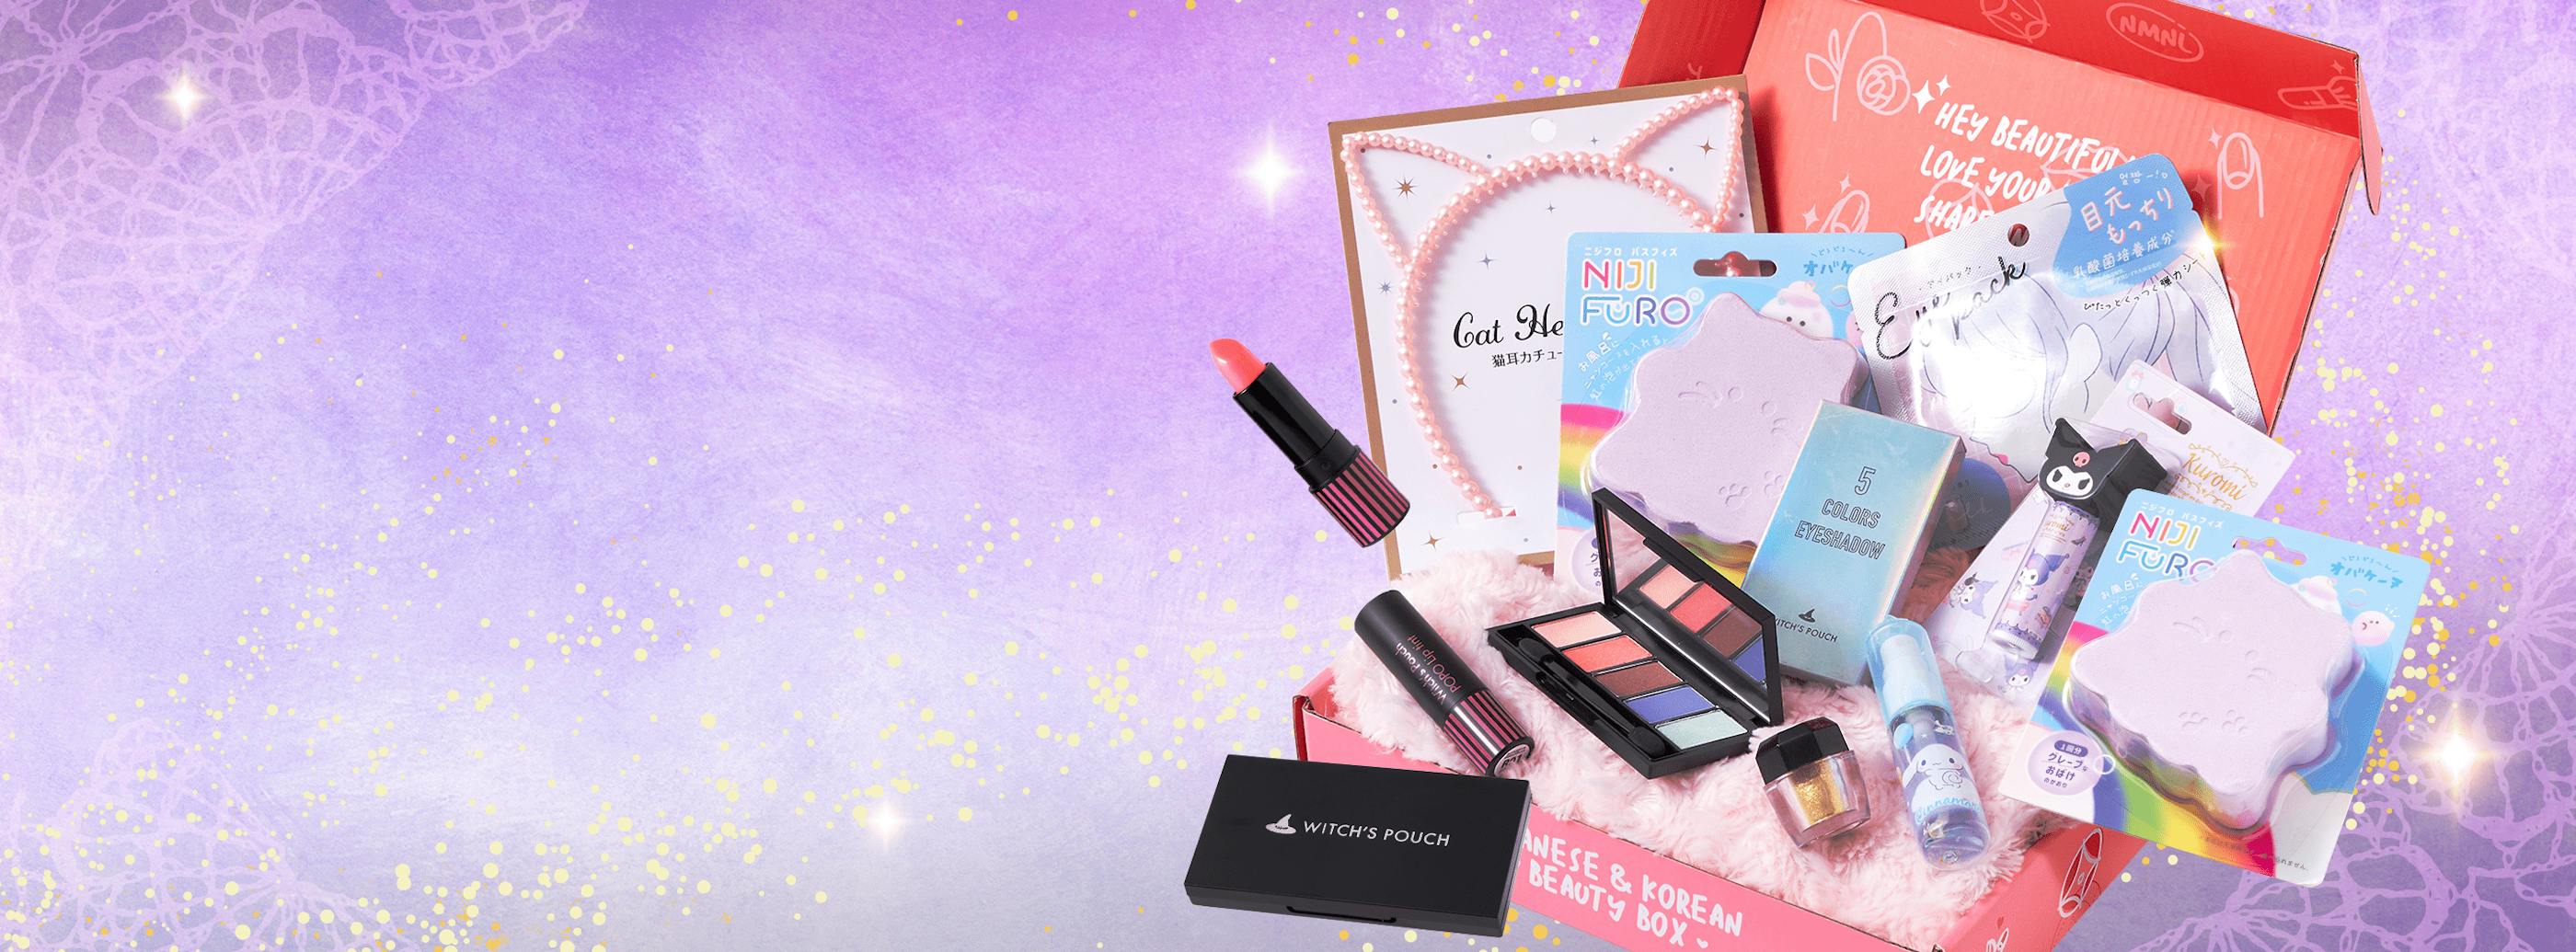 Sign up by October 15th to get 8 mystery Japanese & Korean products in your Enchanted Glam box!